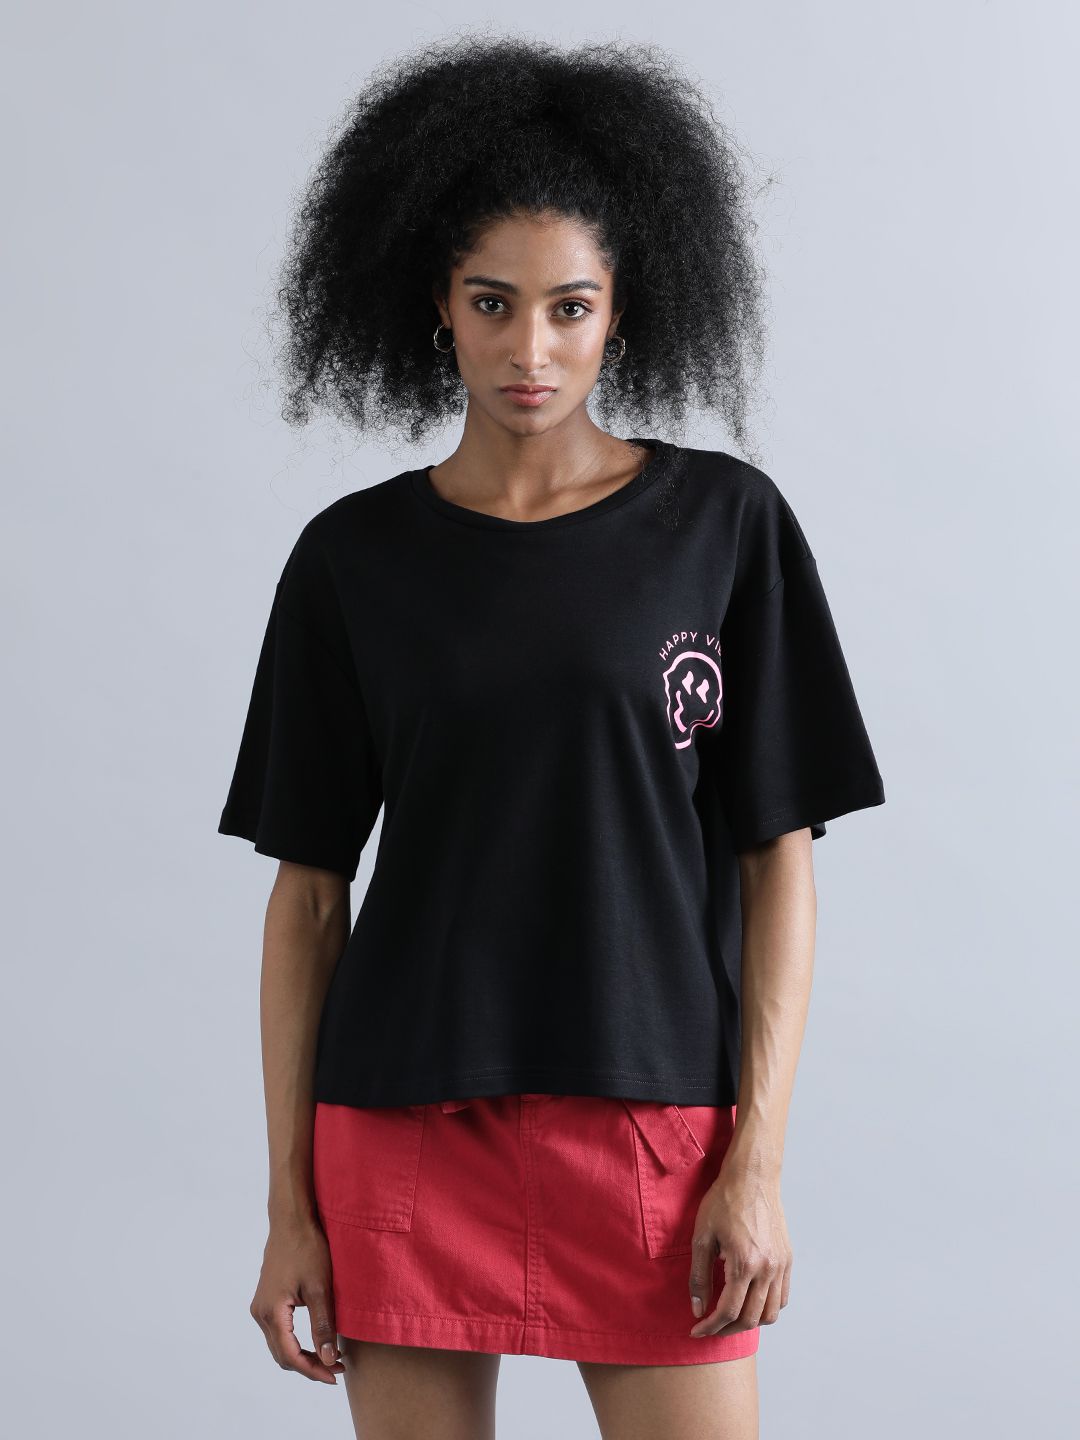     			Bene Kleed Black Cotton Loose Fit Women's T-Shirt ( Pack of 1 )